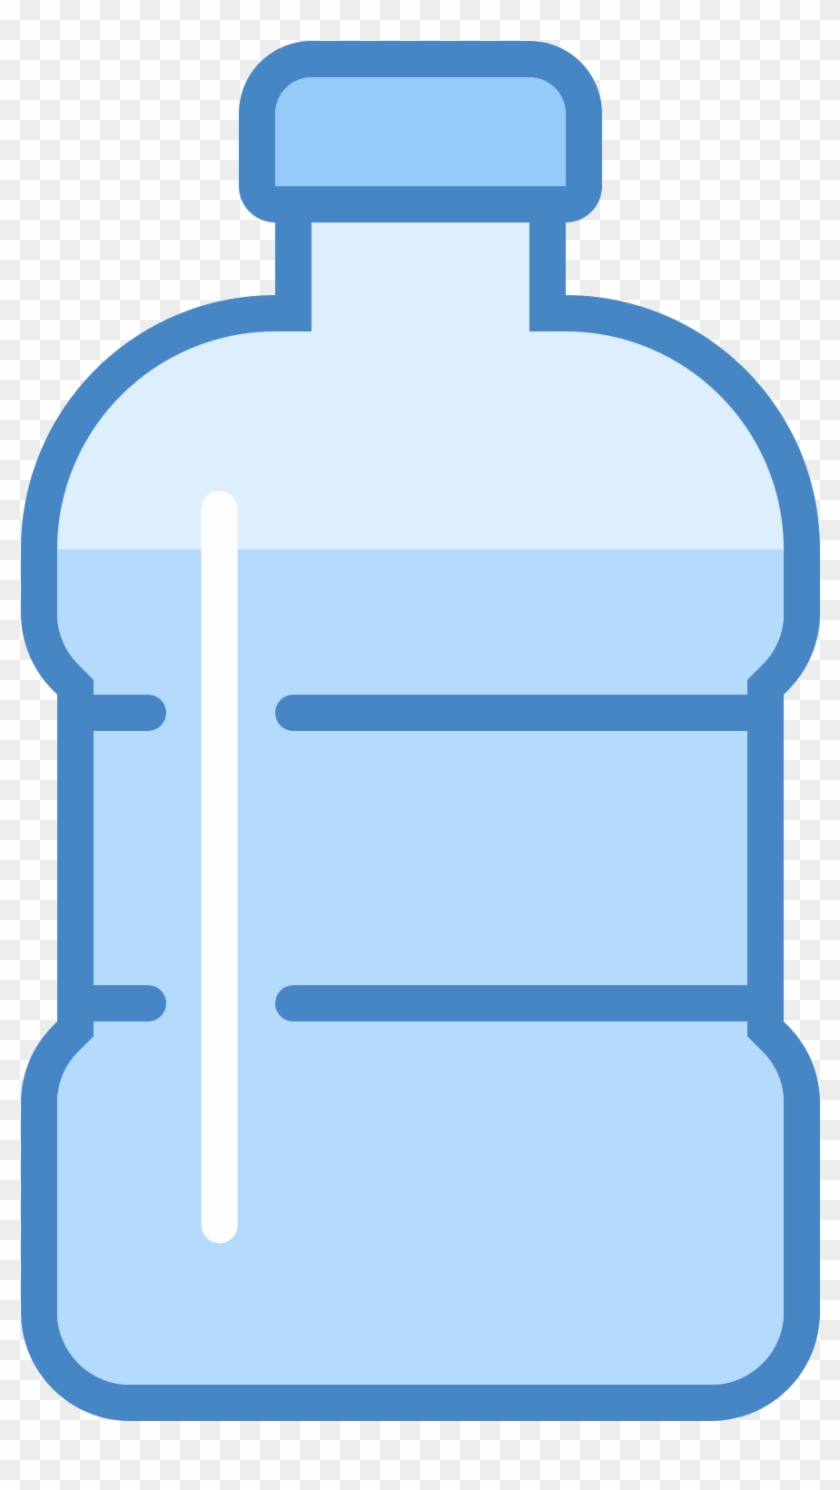 Bottle Of Water Icon - Plastic Water Bottles Clip Art Png #1325612